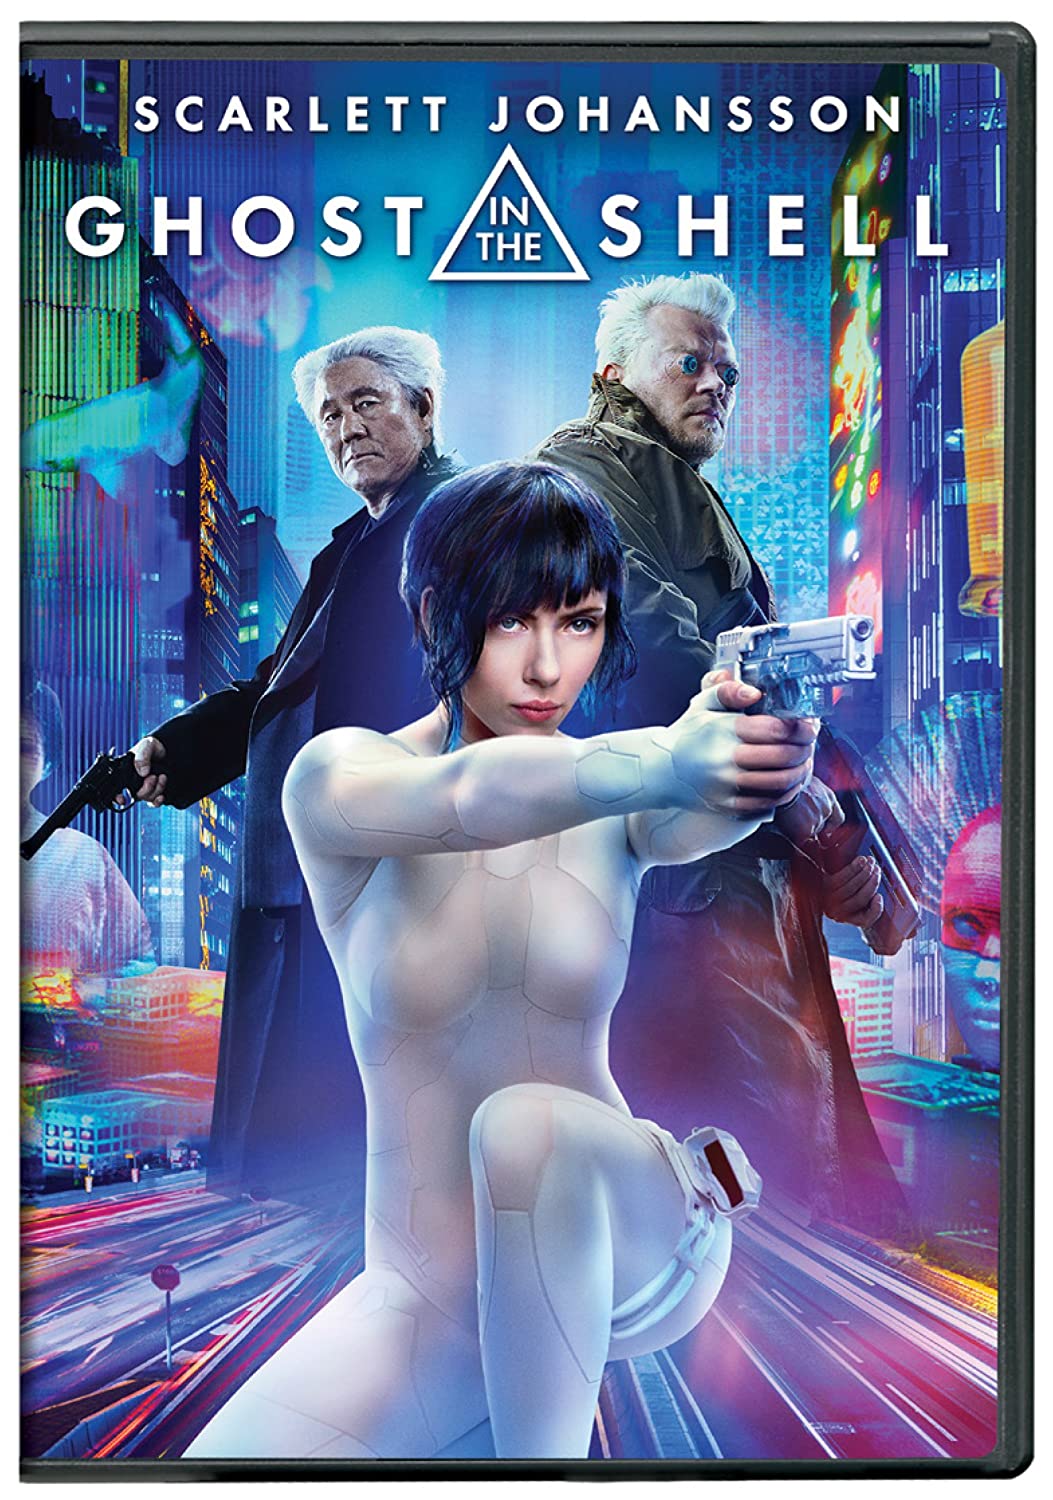 Ghost In The Shell (2017) - Darkside Records